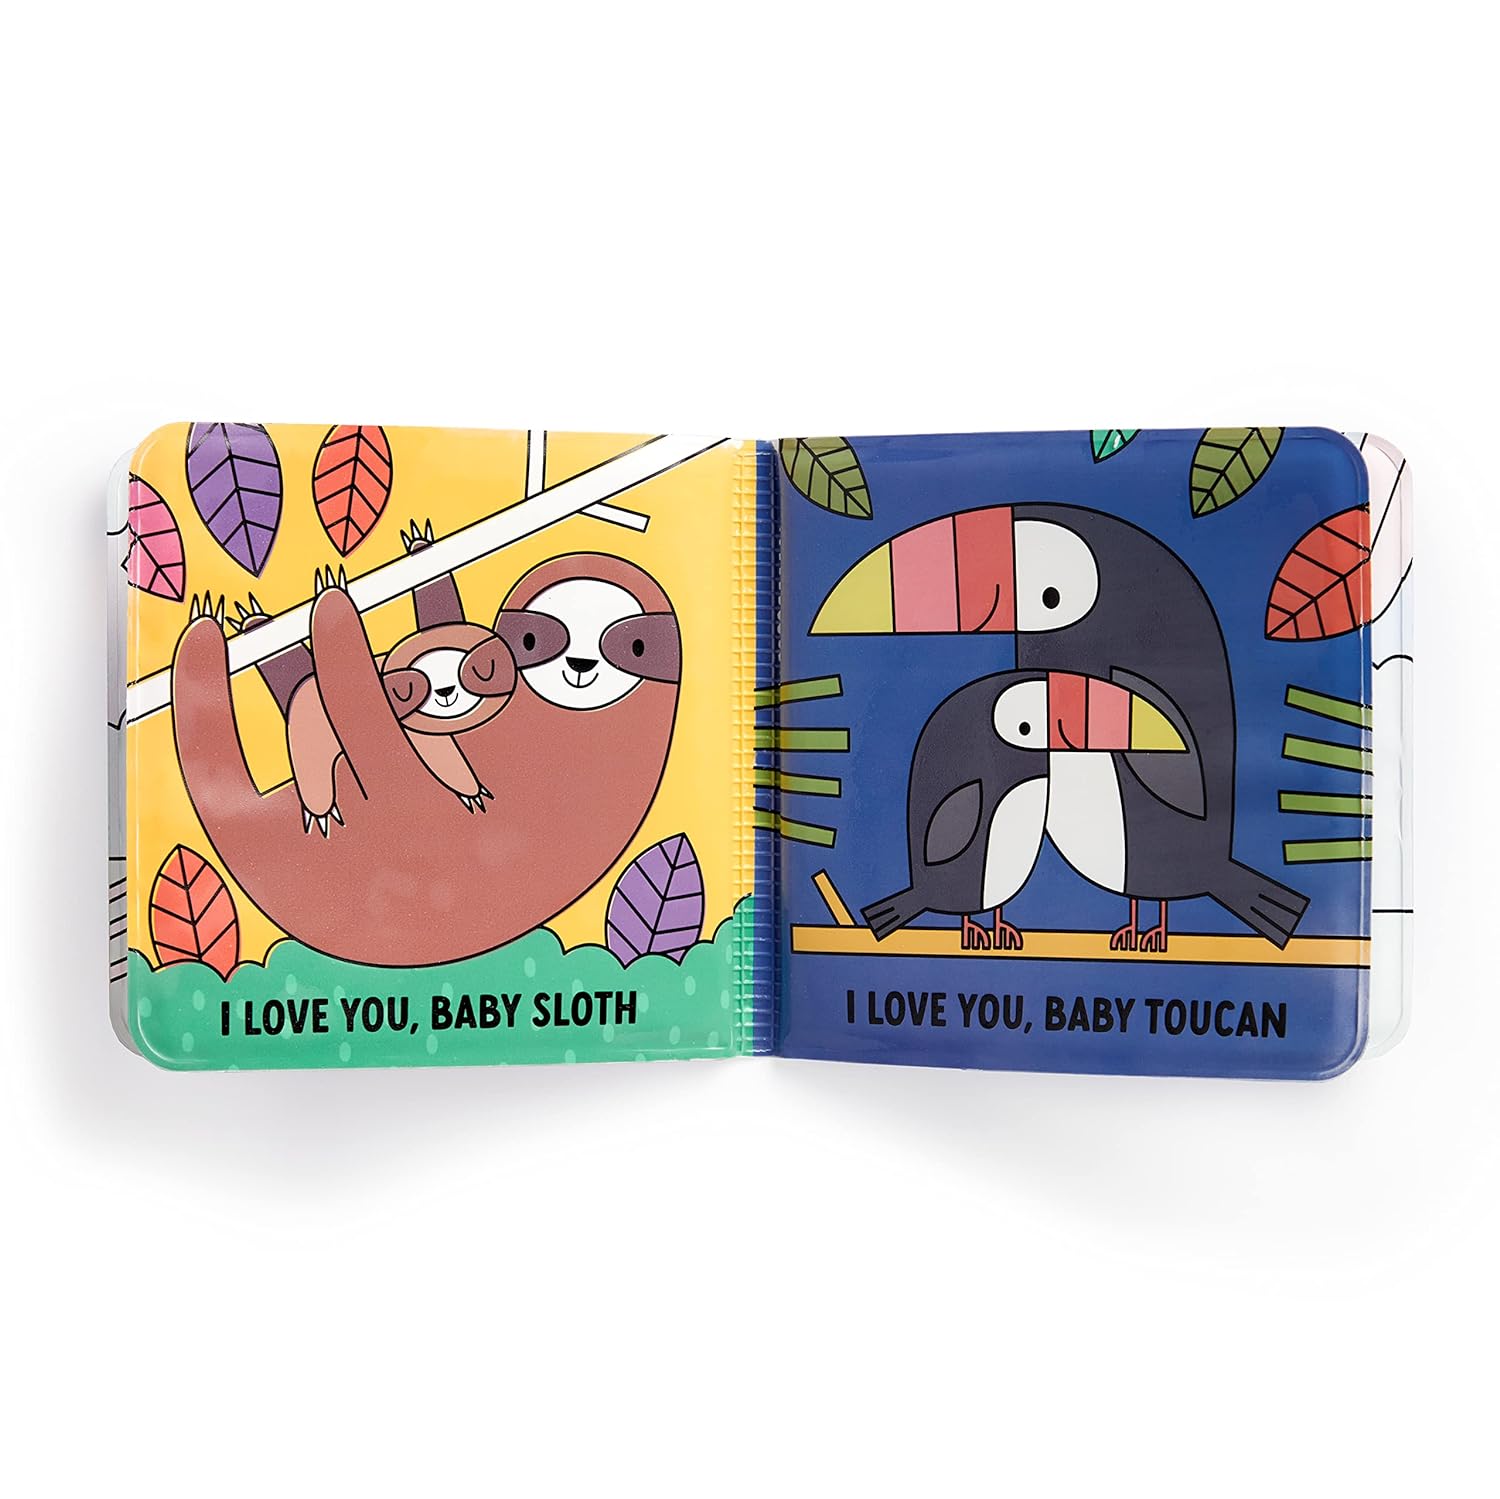 I Love You, Baby Color Magic Bath Book from Mudpuppy is sure to keep babies and toddlers entertained during bath time. Featuring illustrations of brightly colored animals and their youngsters, it is truly a one-of-a-kind experience that will be enjoyed time and time again. 